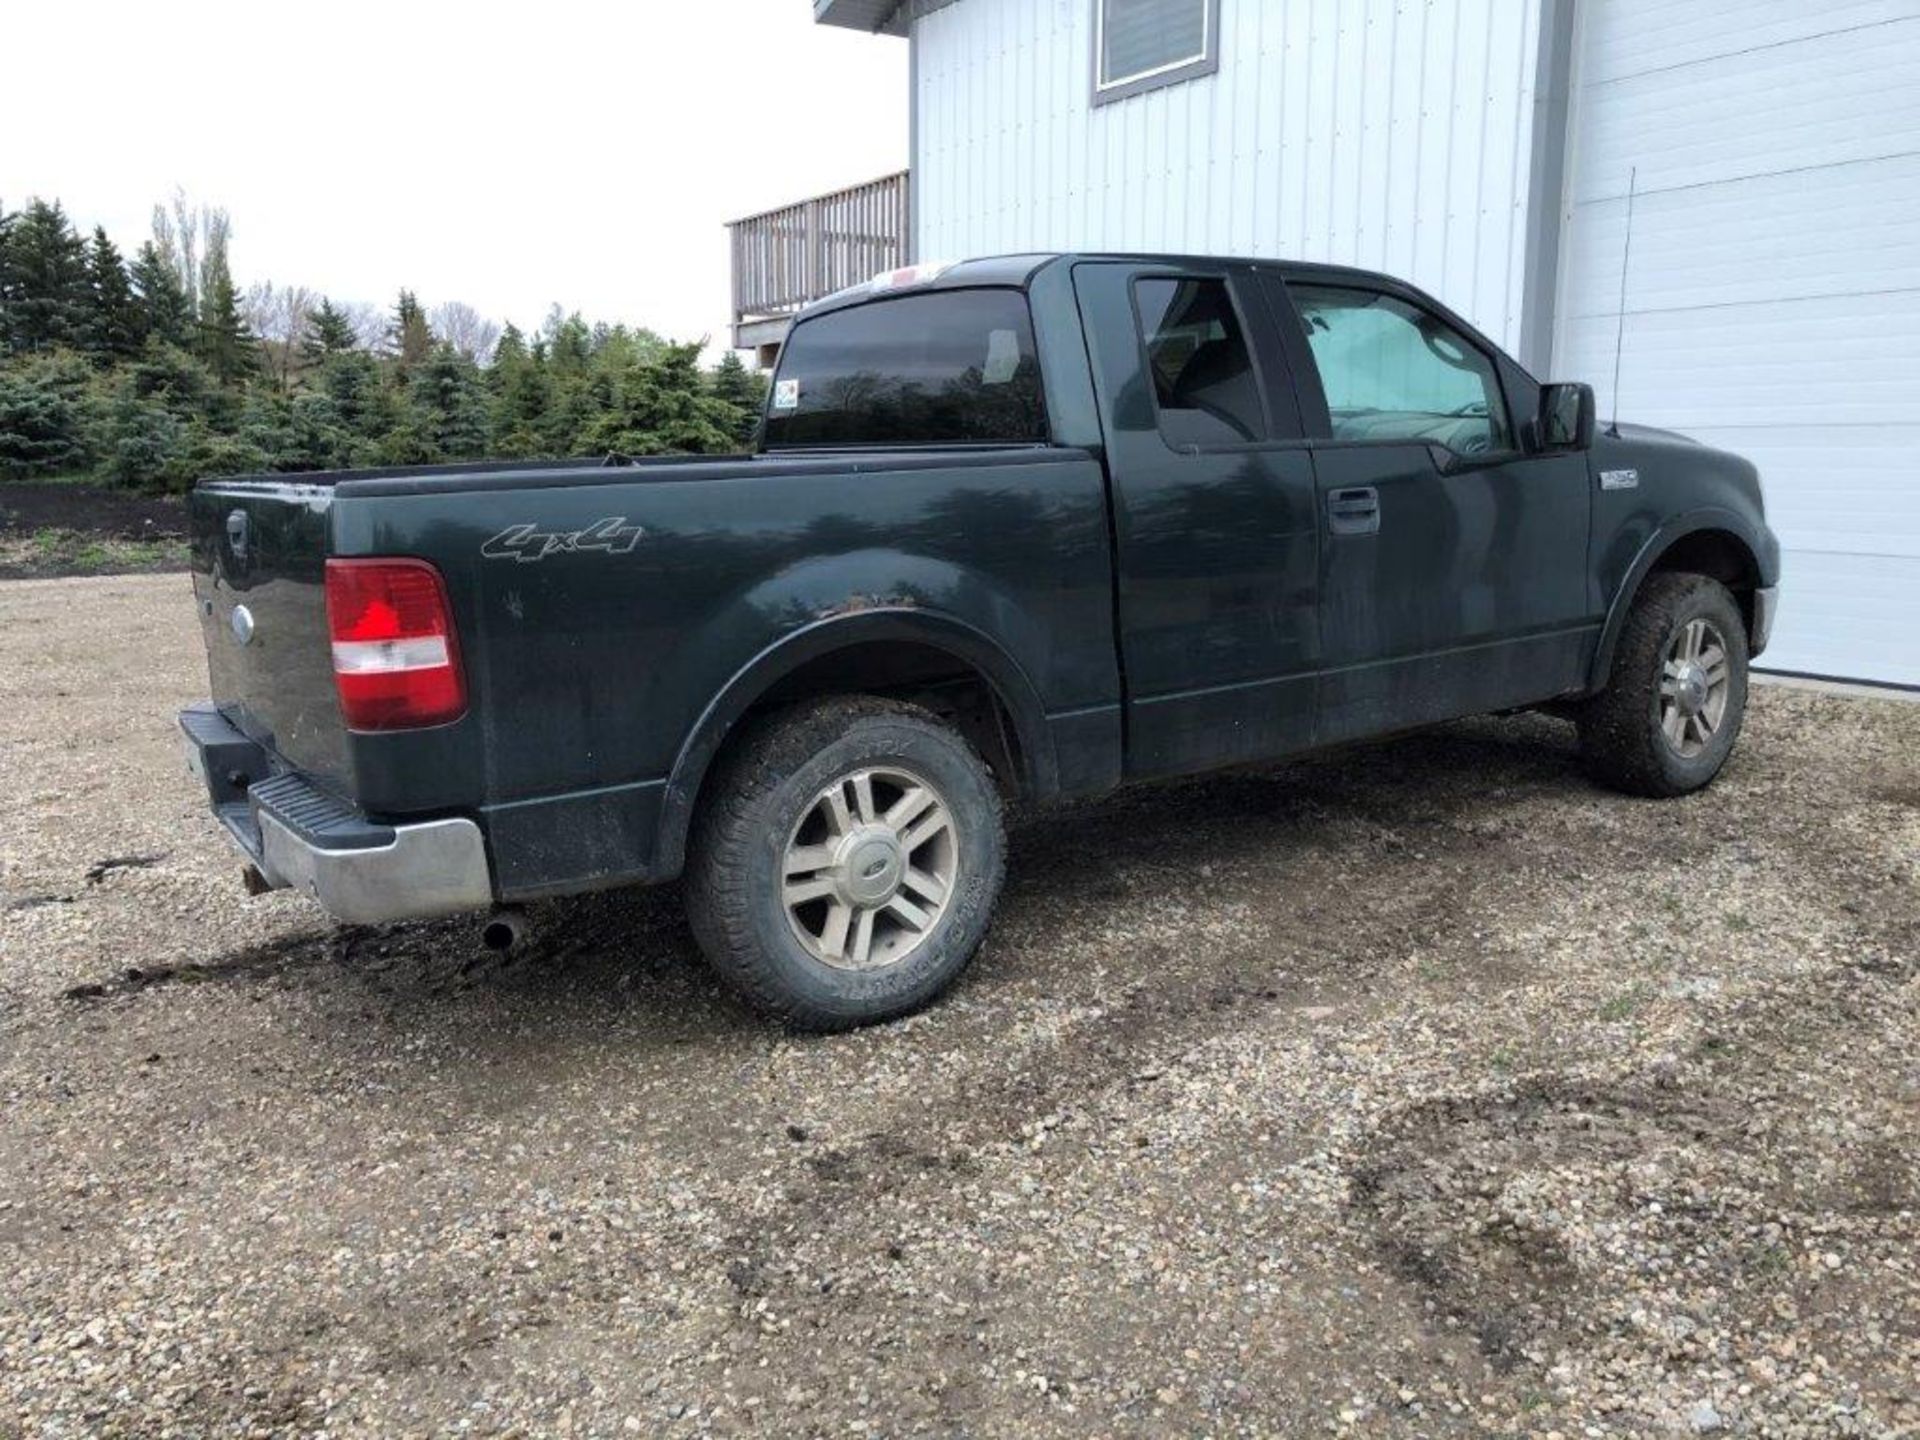 2006 FORD F150 LARIAT P/U TRUCK, 4X4, EXT CAB, LEATHER, 235,000KM SHOWING, S/N 1FTPX14556FA86613 - Image 2 of 6